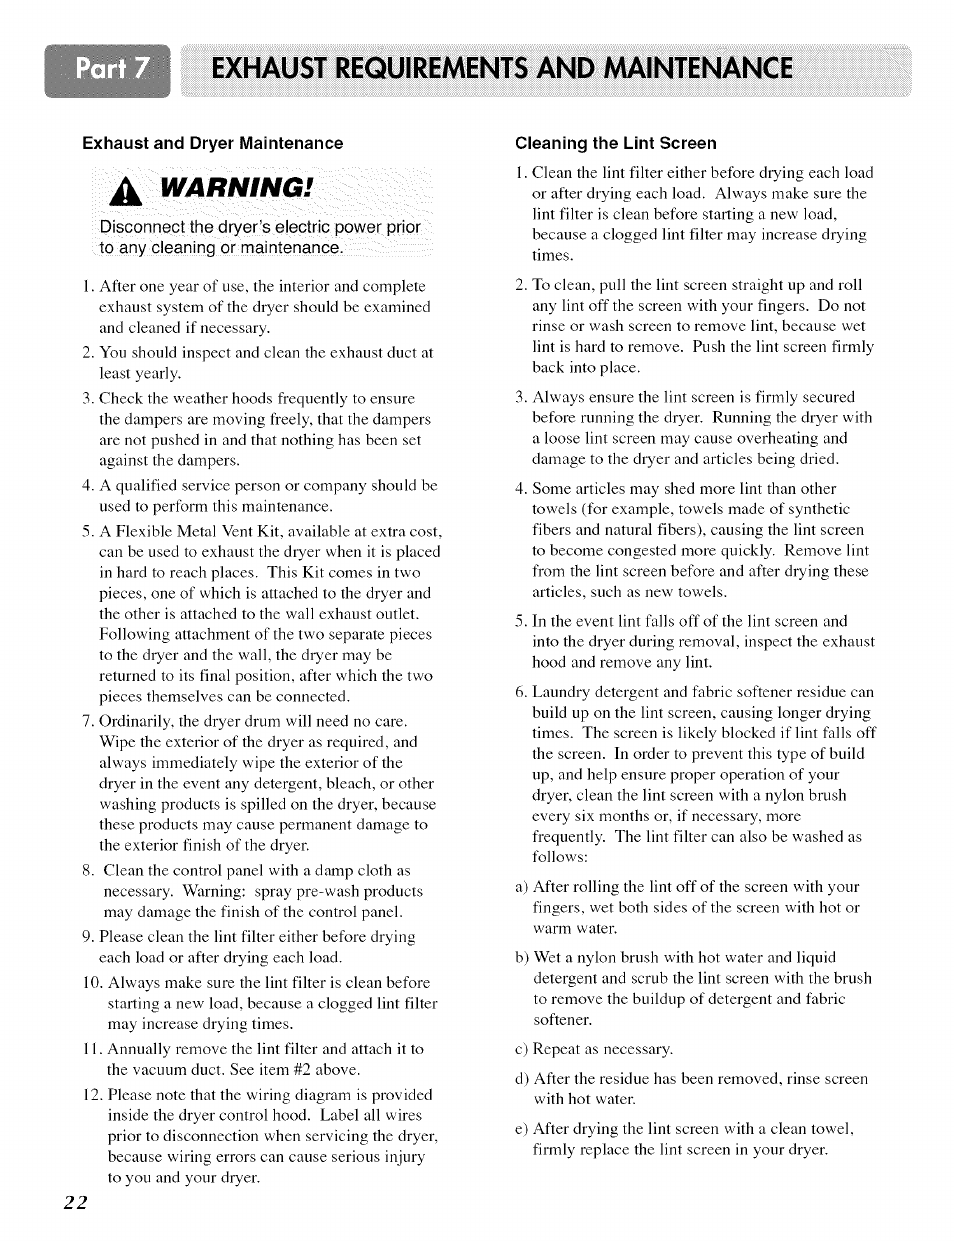 Exhaust and dryer maintenance, Cleaning the lint screen, Exhaust requirements and maintenange | Warning | LG ELECTRIC AND GAS DRYER D 5988W User Manual | Page 22 / 32